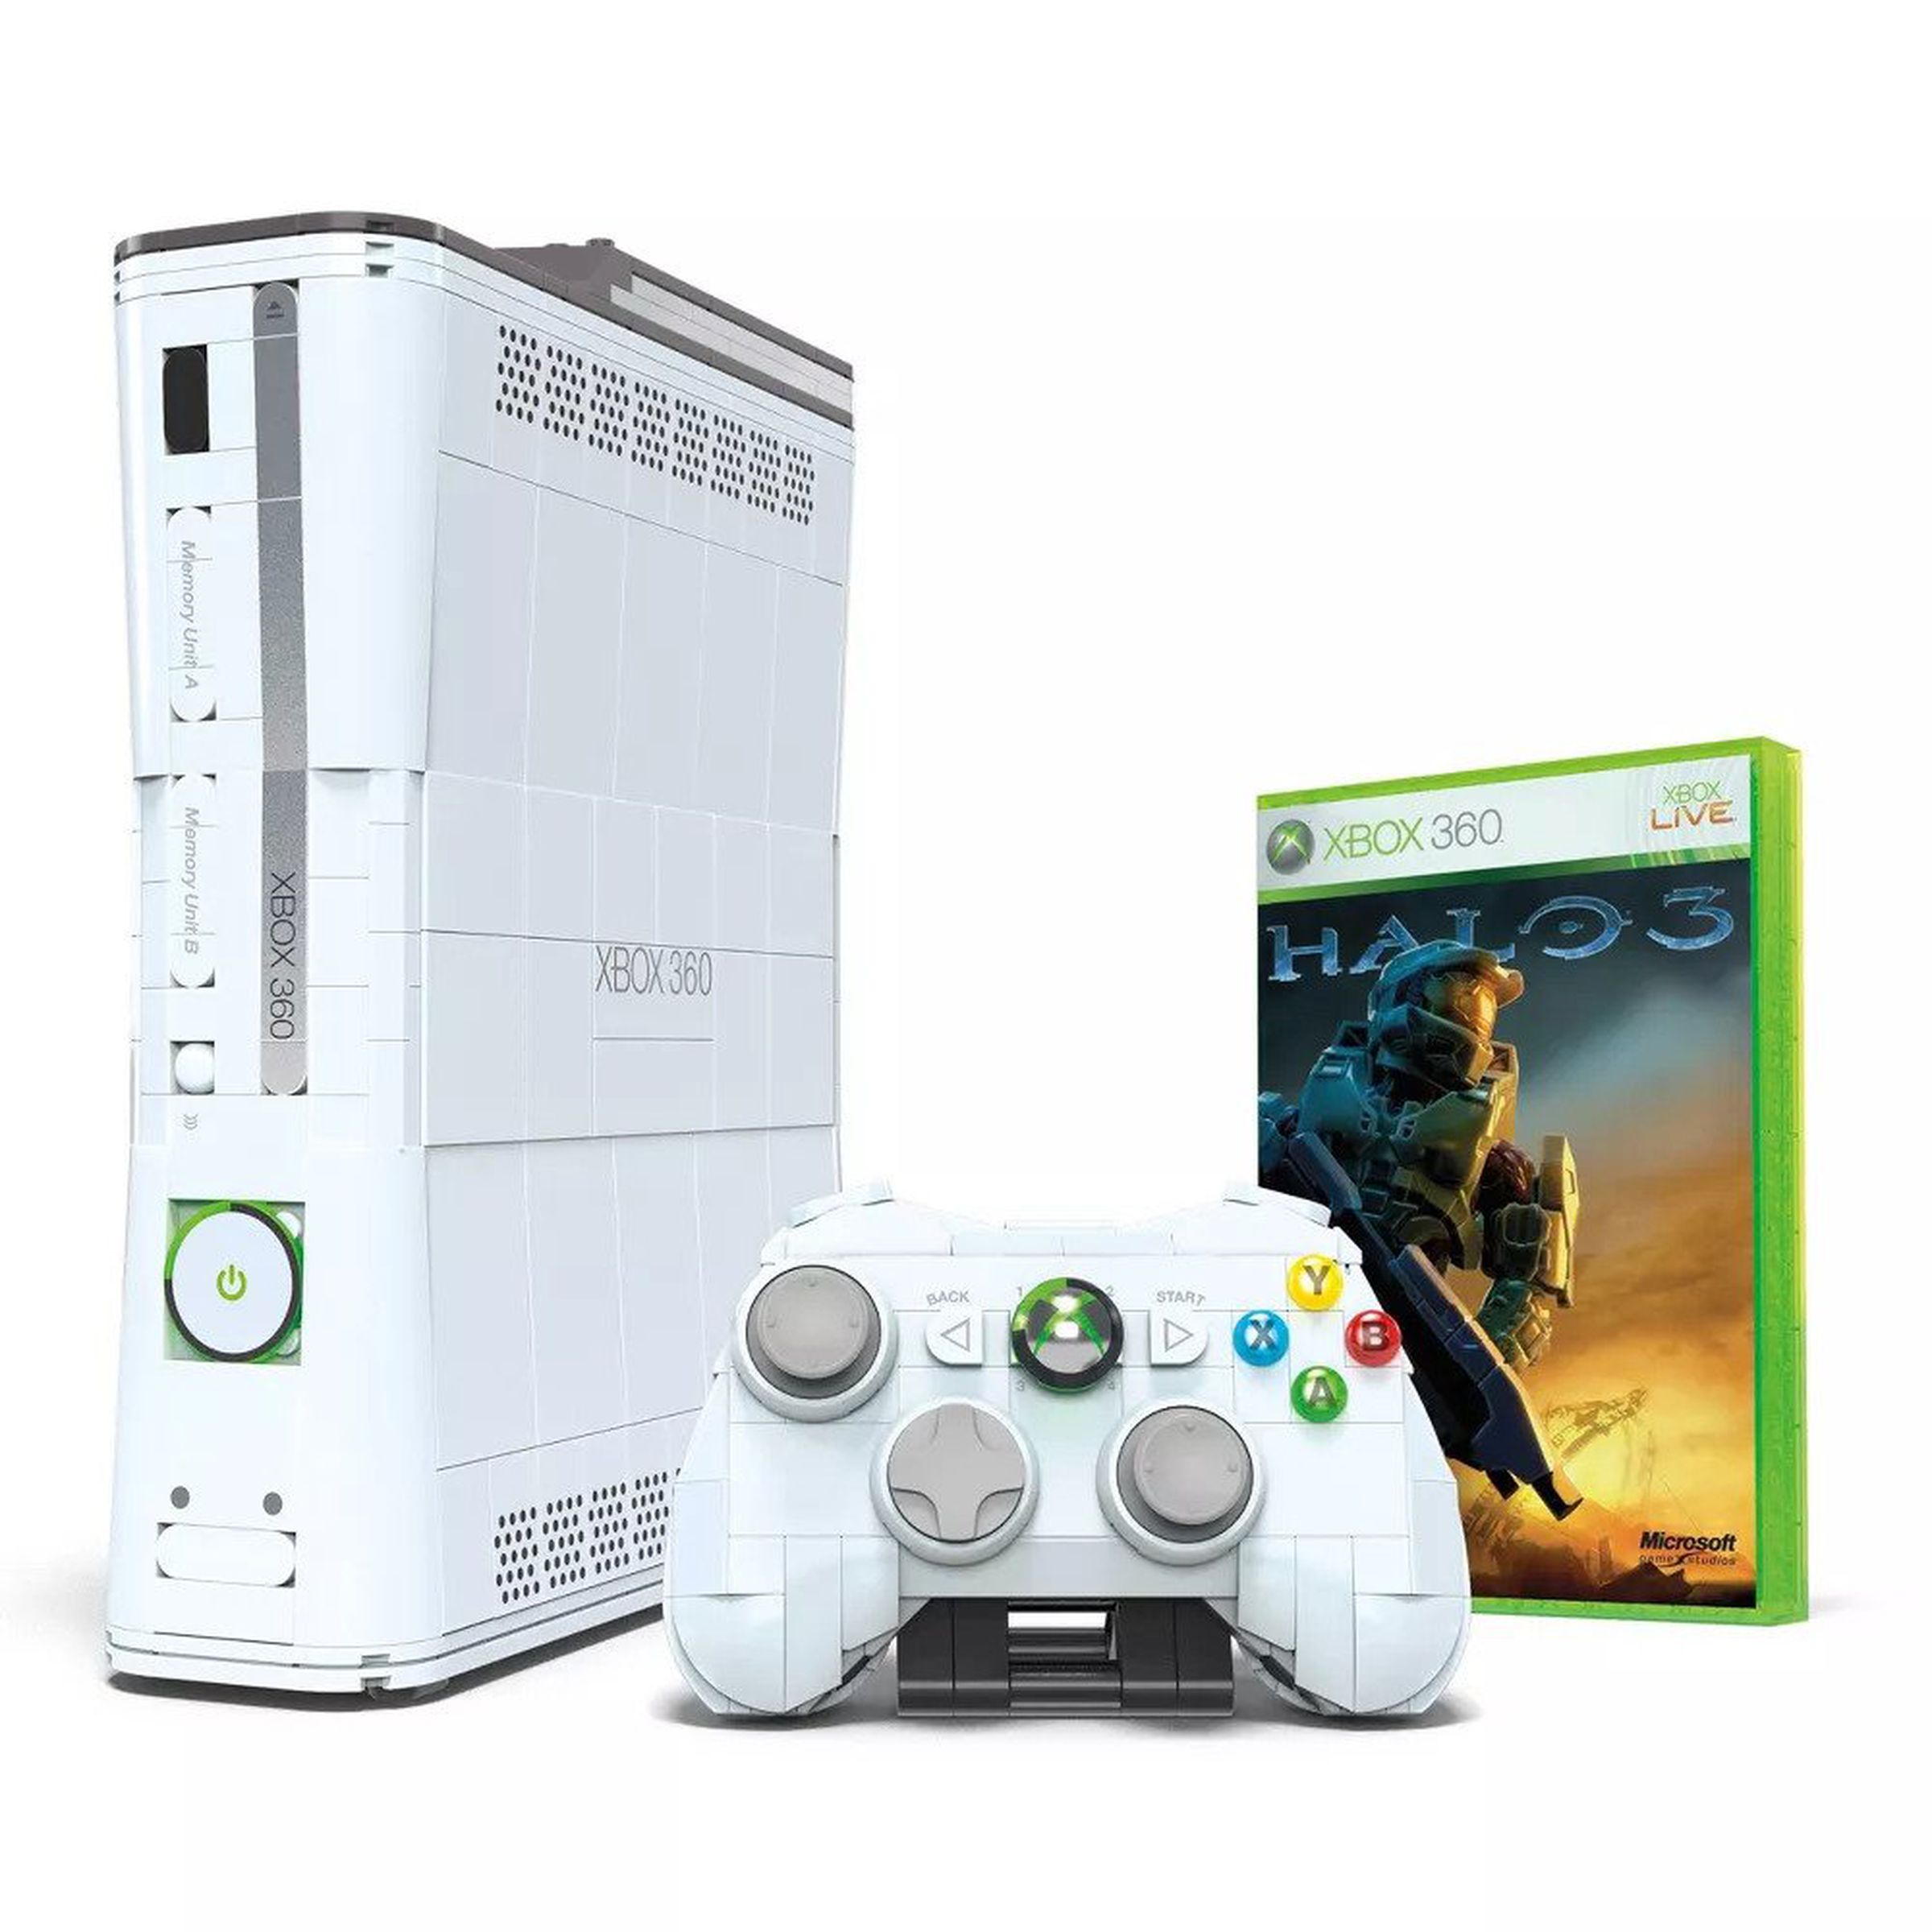 Screenshot from Mega’s Xbox 360 replica console featuring the brick-constructed console, a controller, and a copy of Halo 3